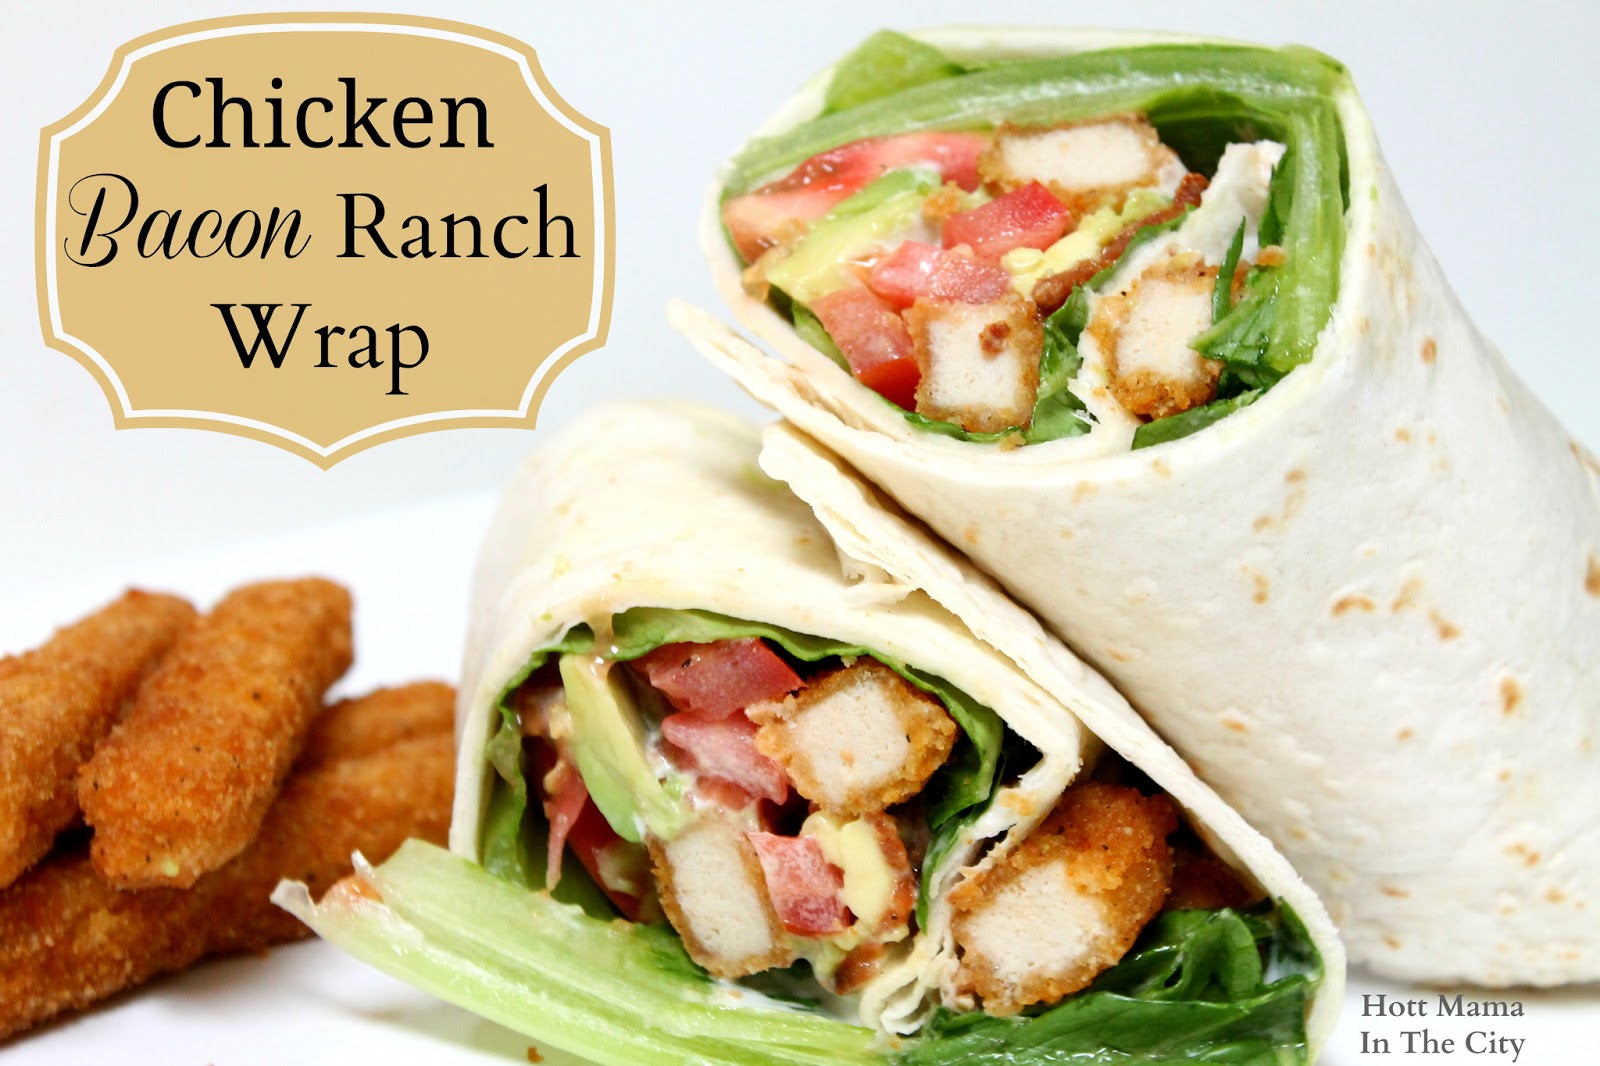 This Chicken Bacon Ranch Wrap recipe has been compensated as part of a soci...